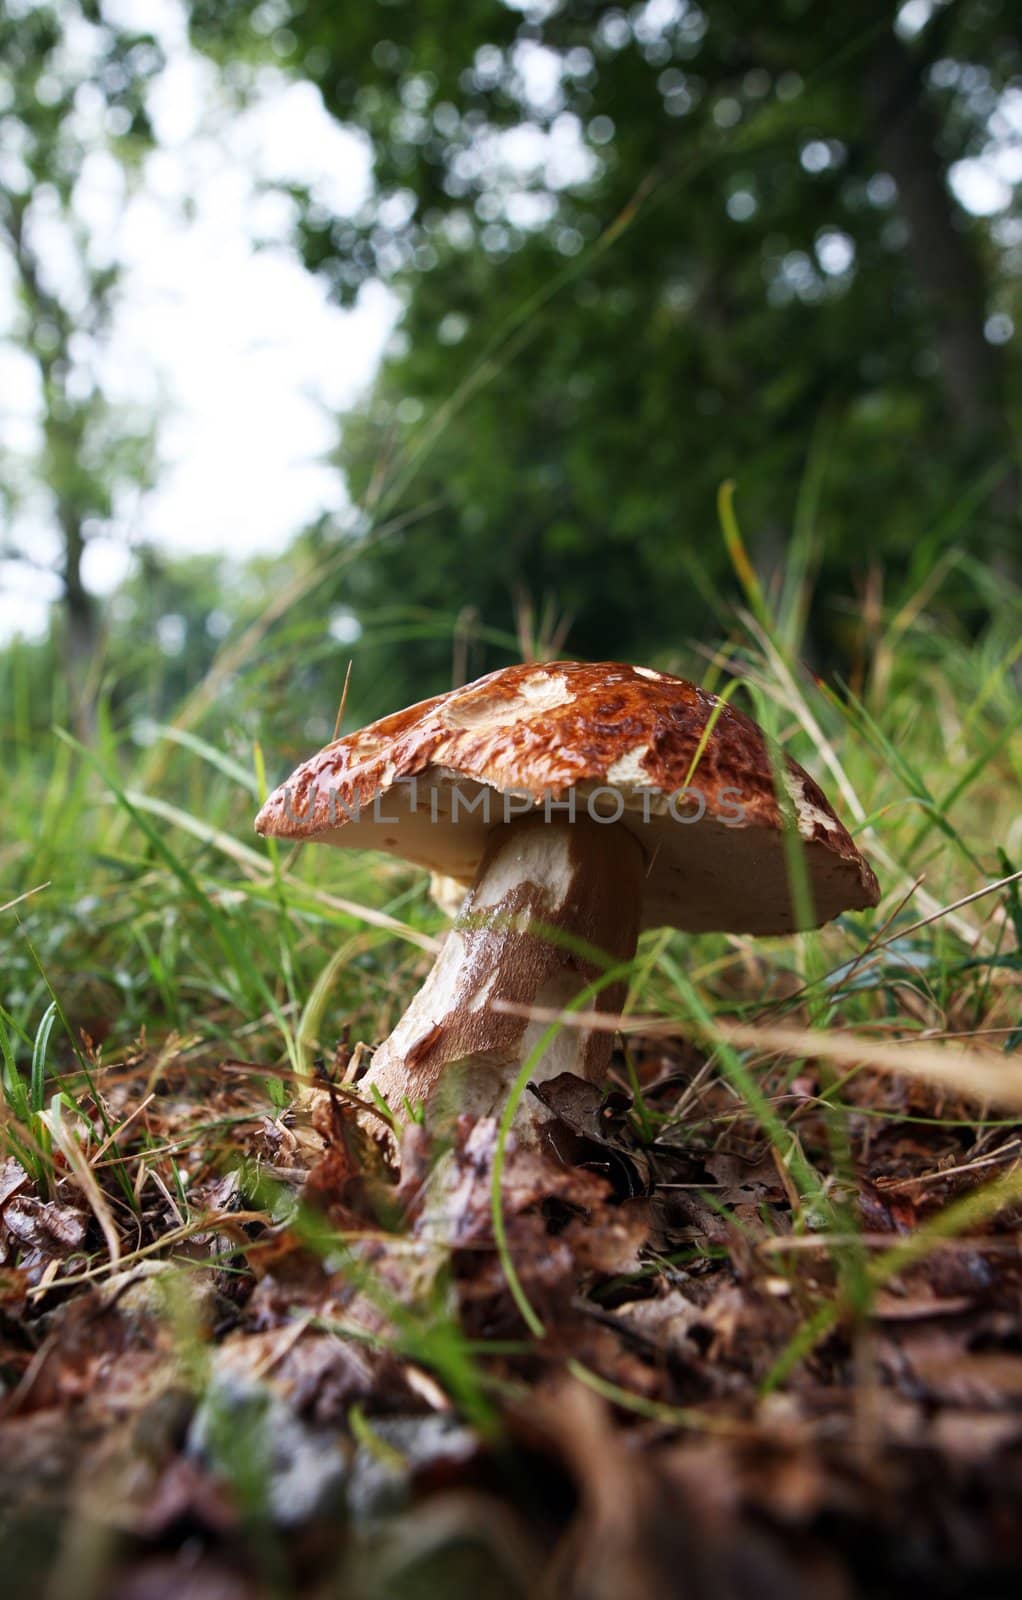 wild growing mushrooms in the grass by haak78